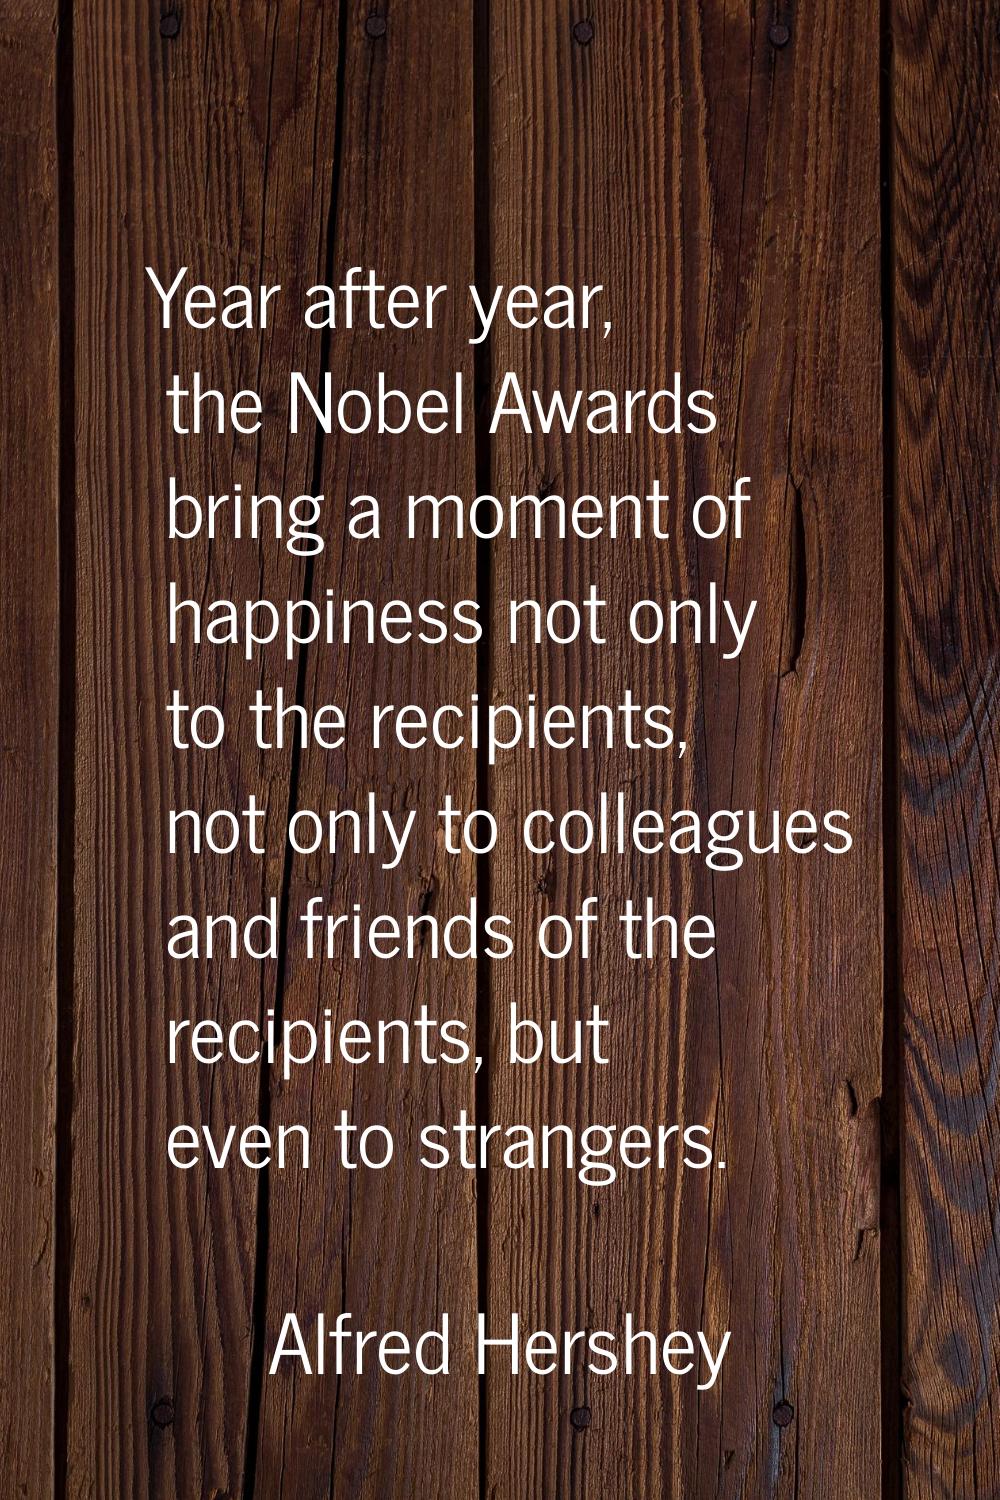 Year after year, the Nobel Awards bring a moment of happiness not only to the recipients, not only 